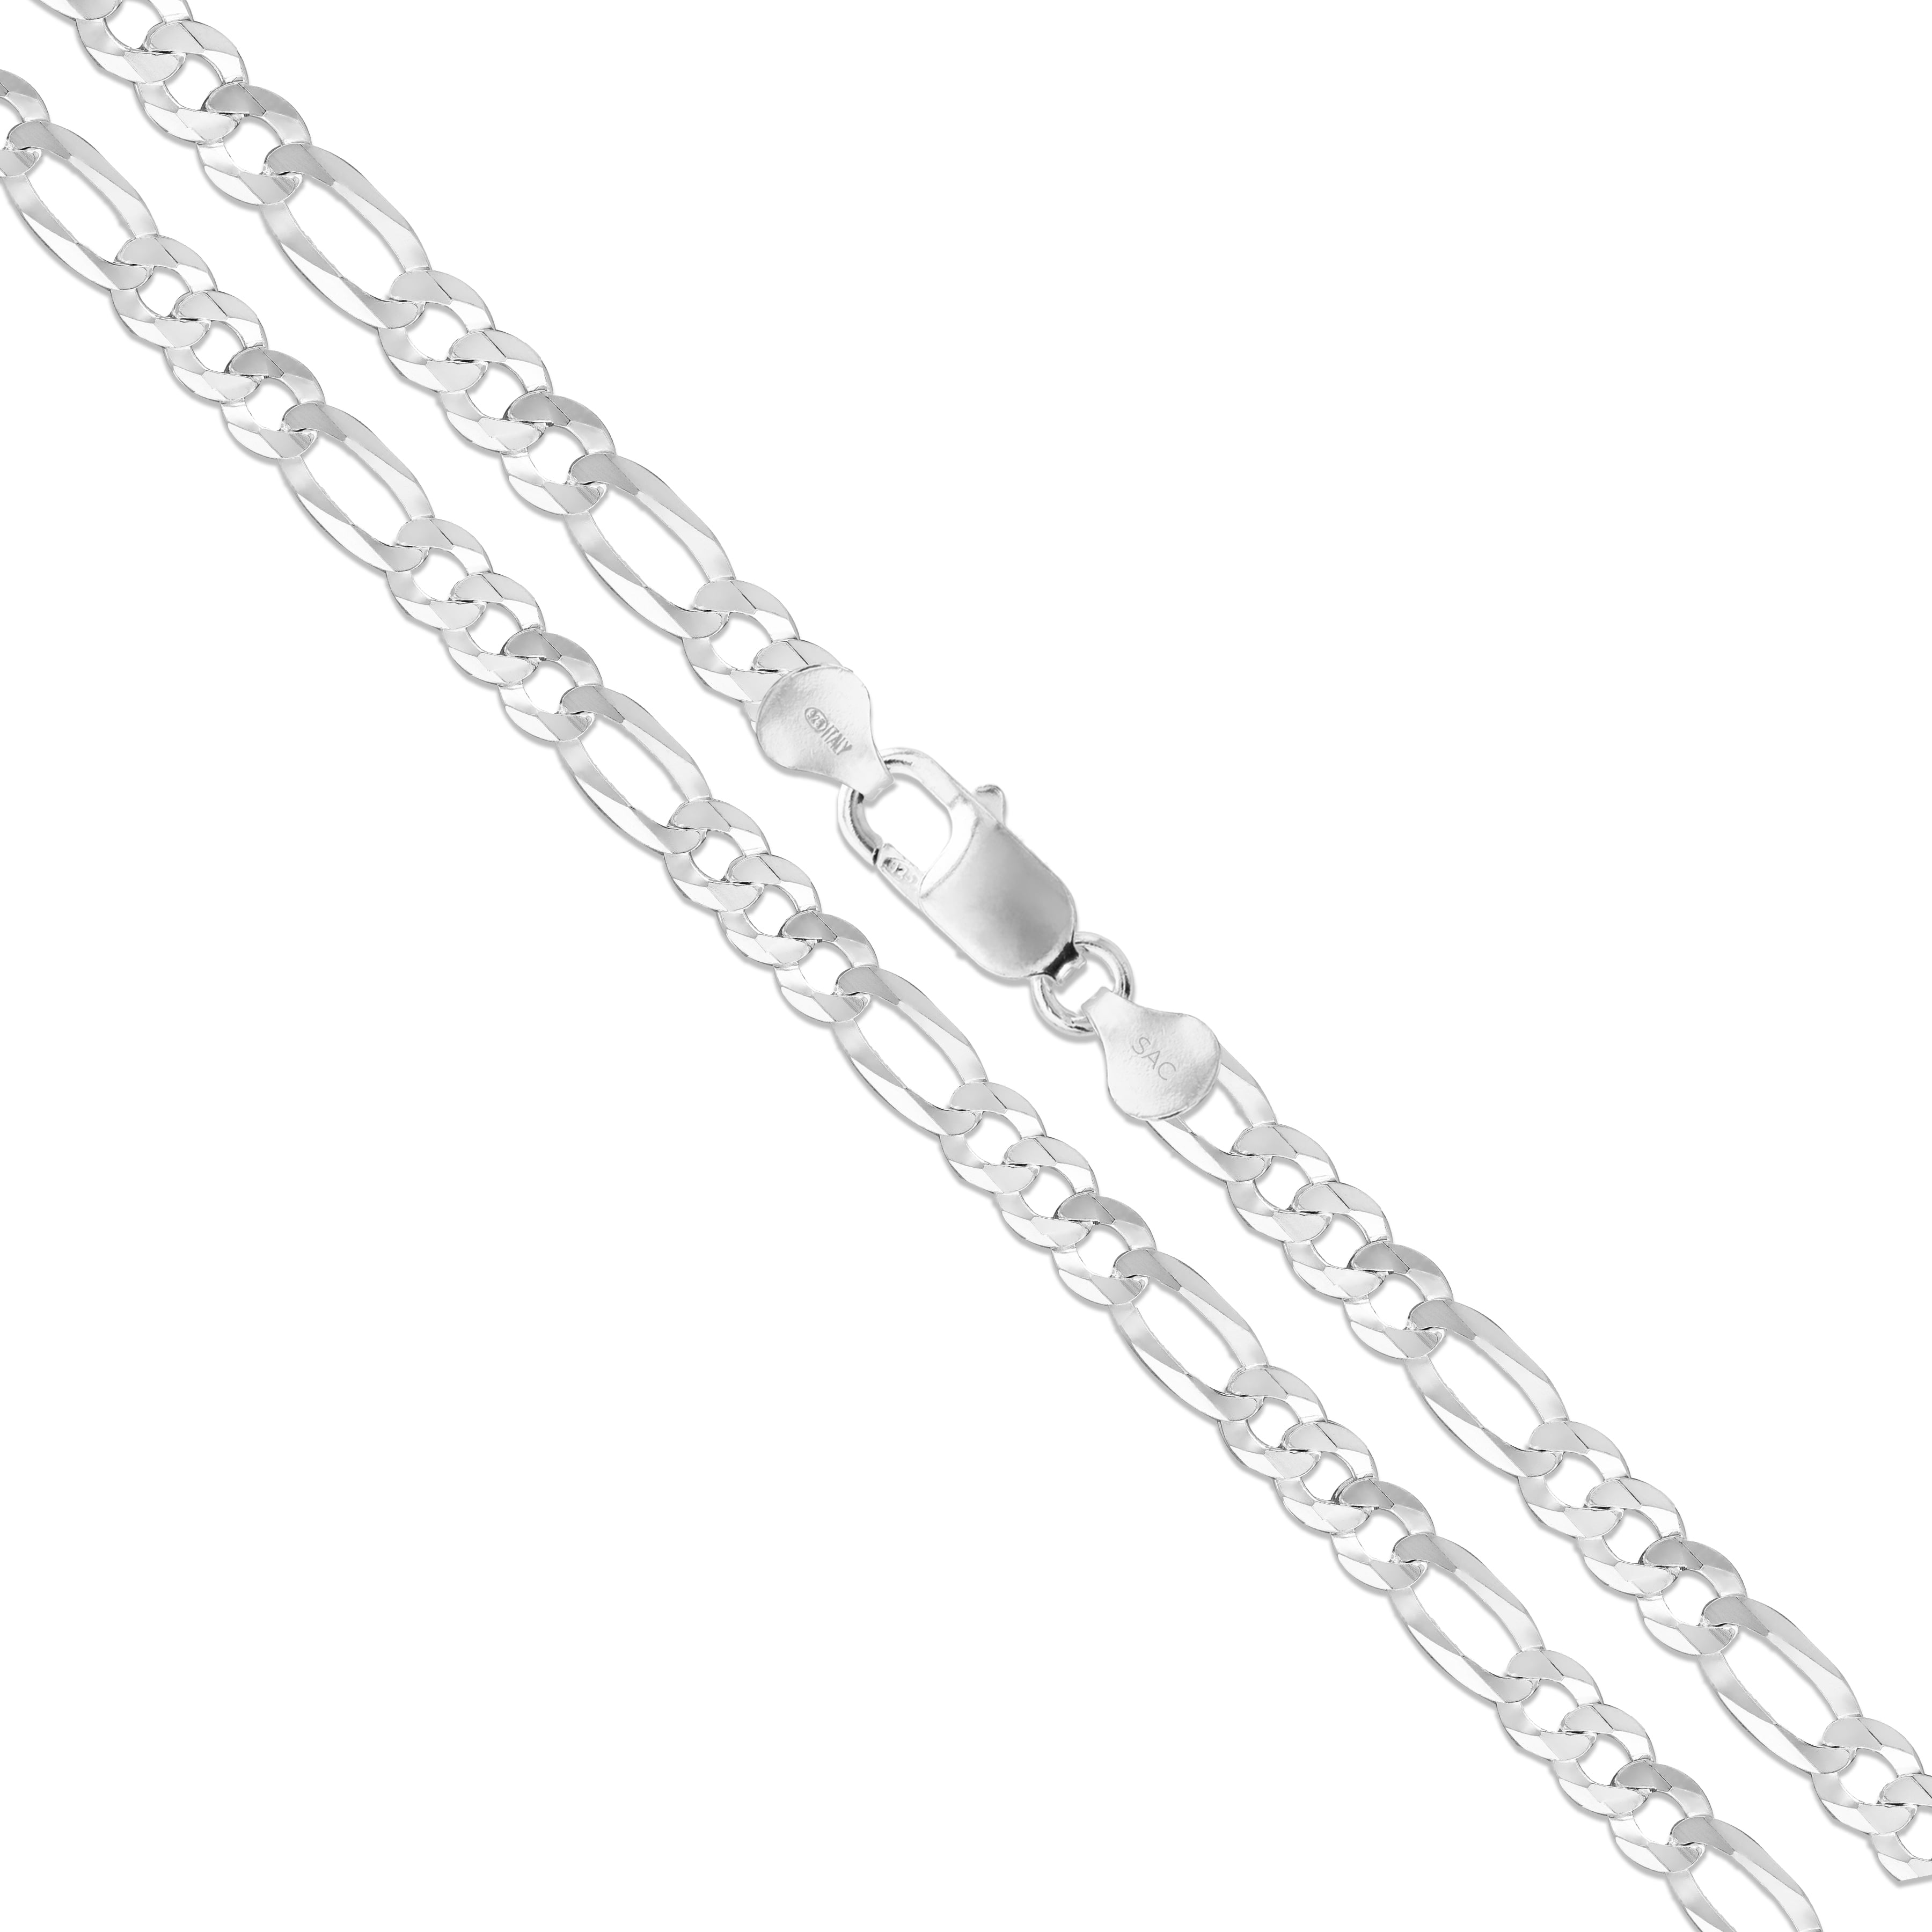 Luwsldirr Pendant Necklace Men Fashion Twist Oblate Wide Chain Necklace  Gift Jewelry Accessories Jewelry Gifts for Women Daily Life Club - Silver  50cm